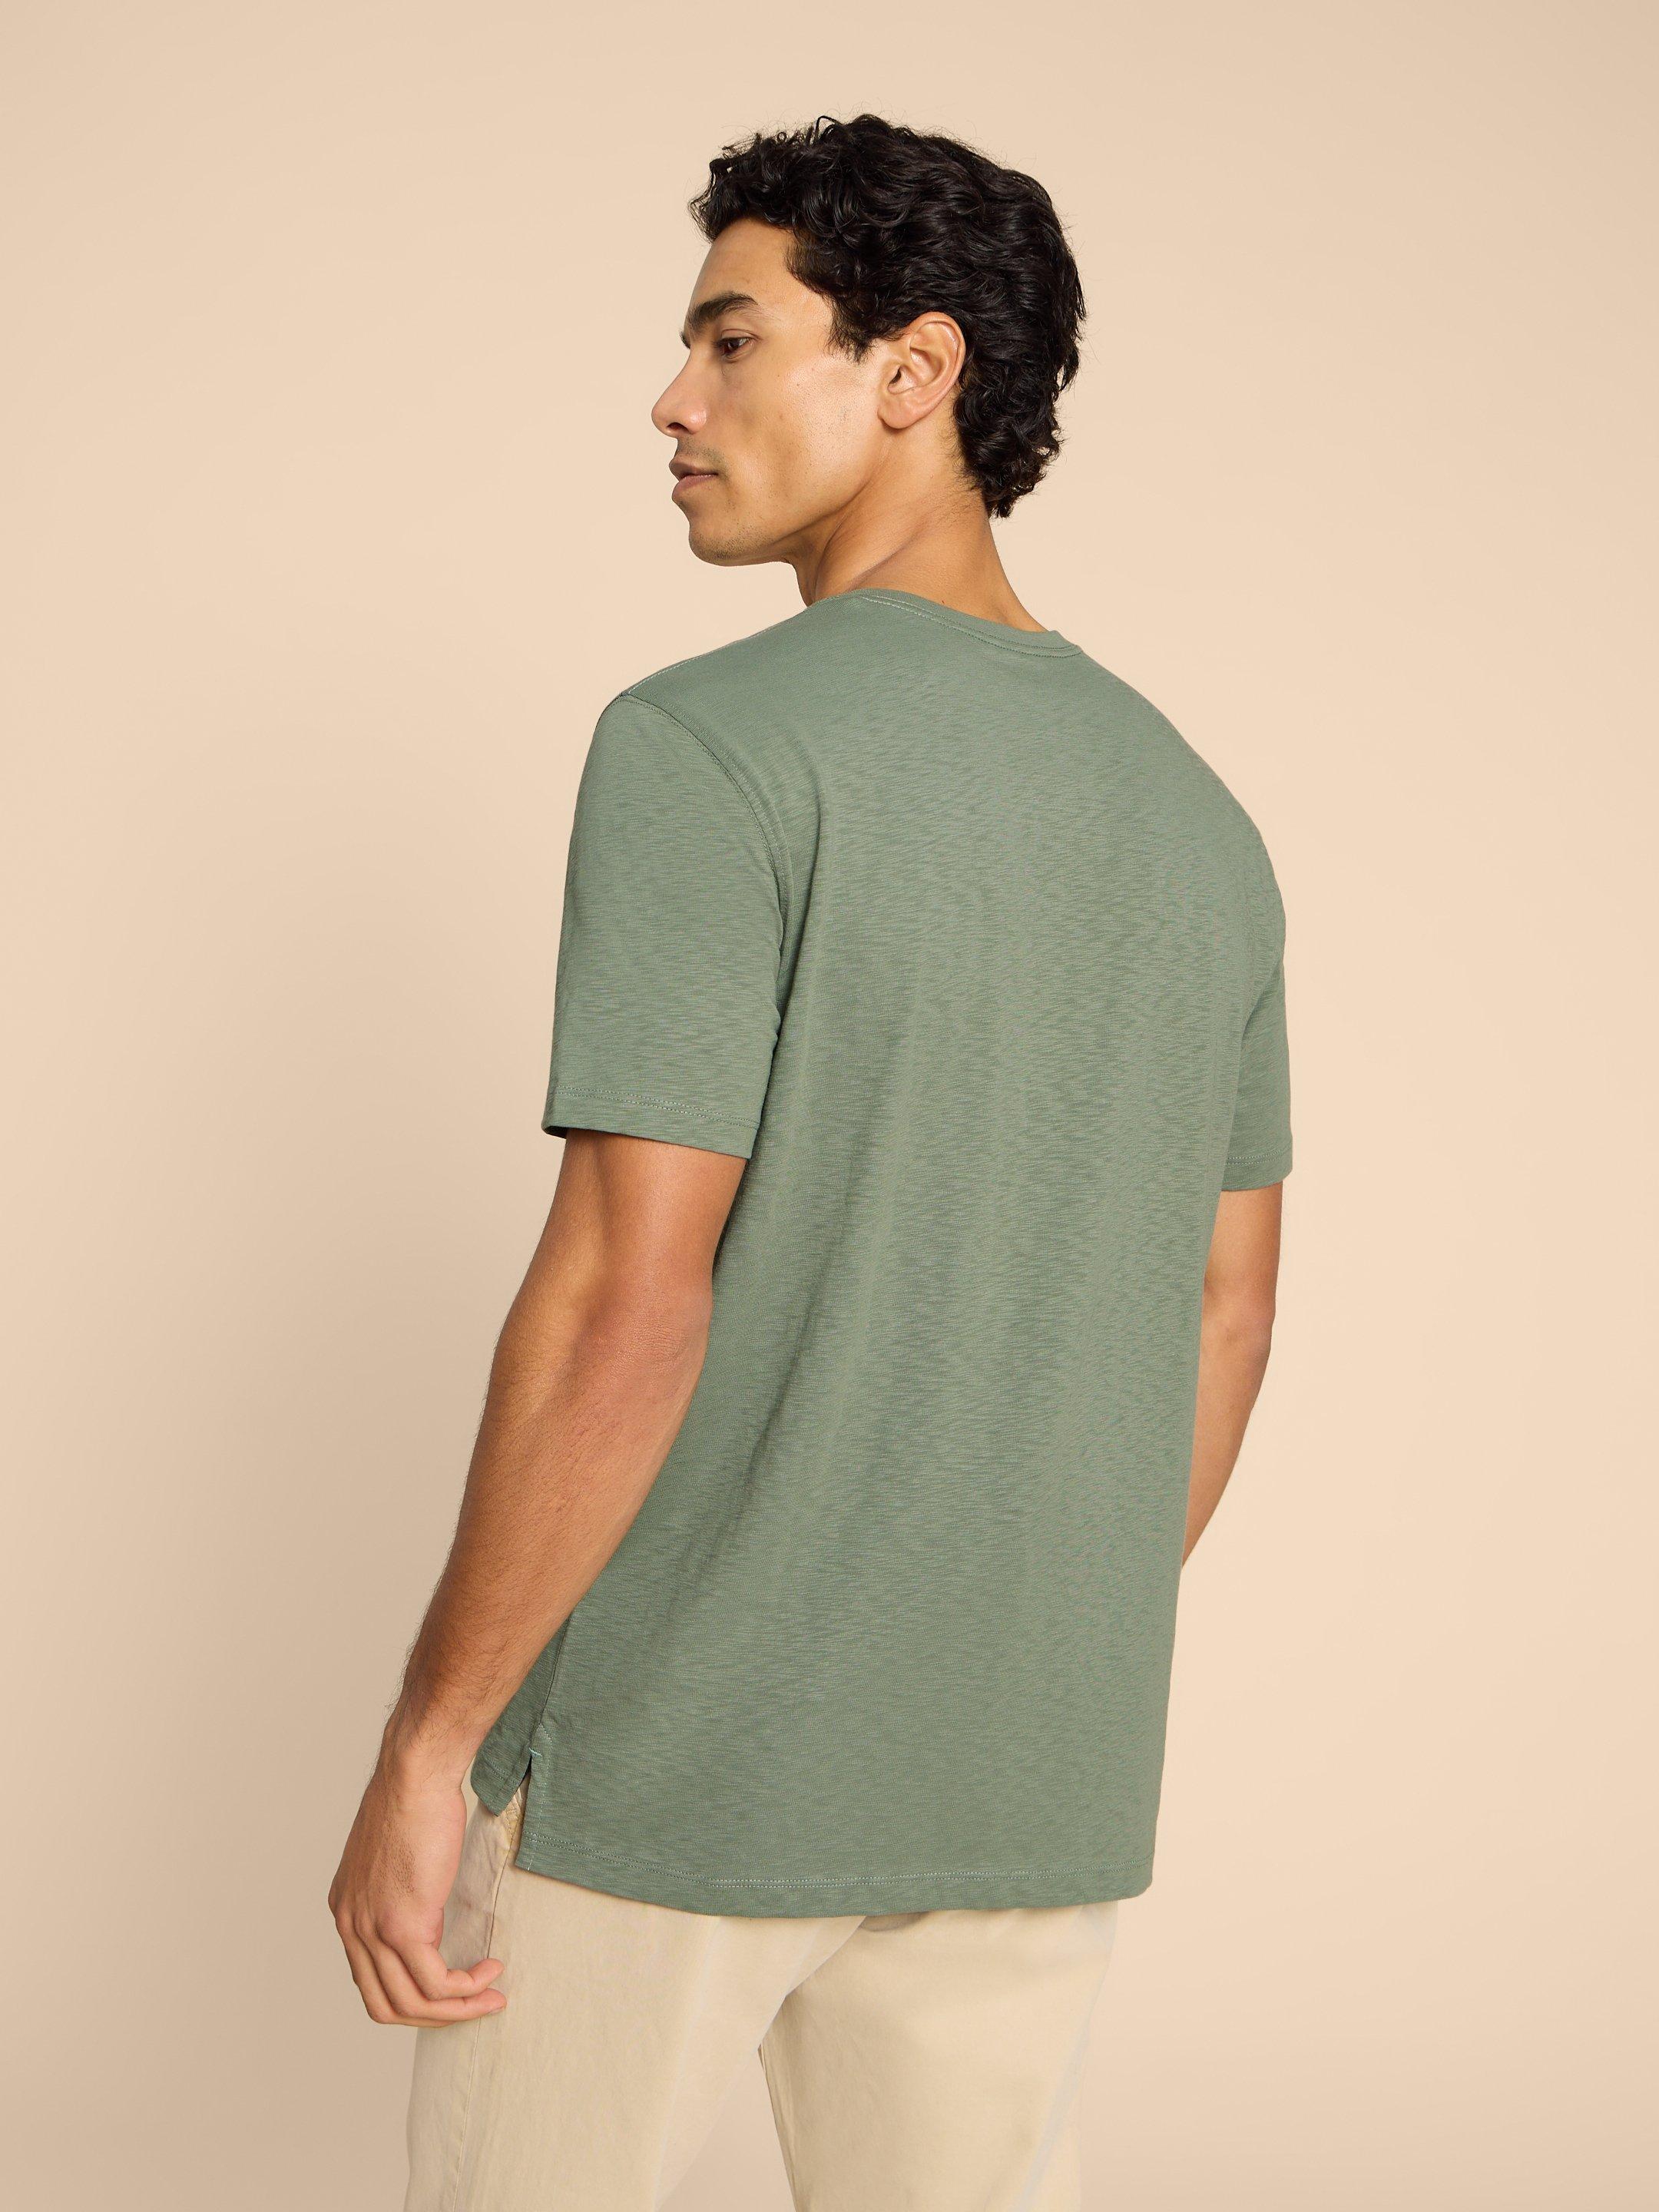 Ride Graphic Tee in GREEN PR - MODEL BACK